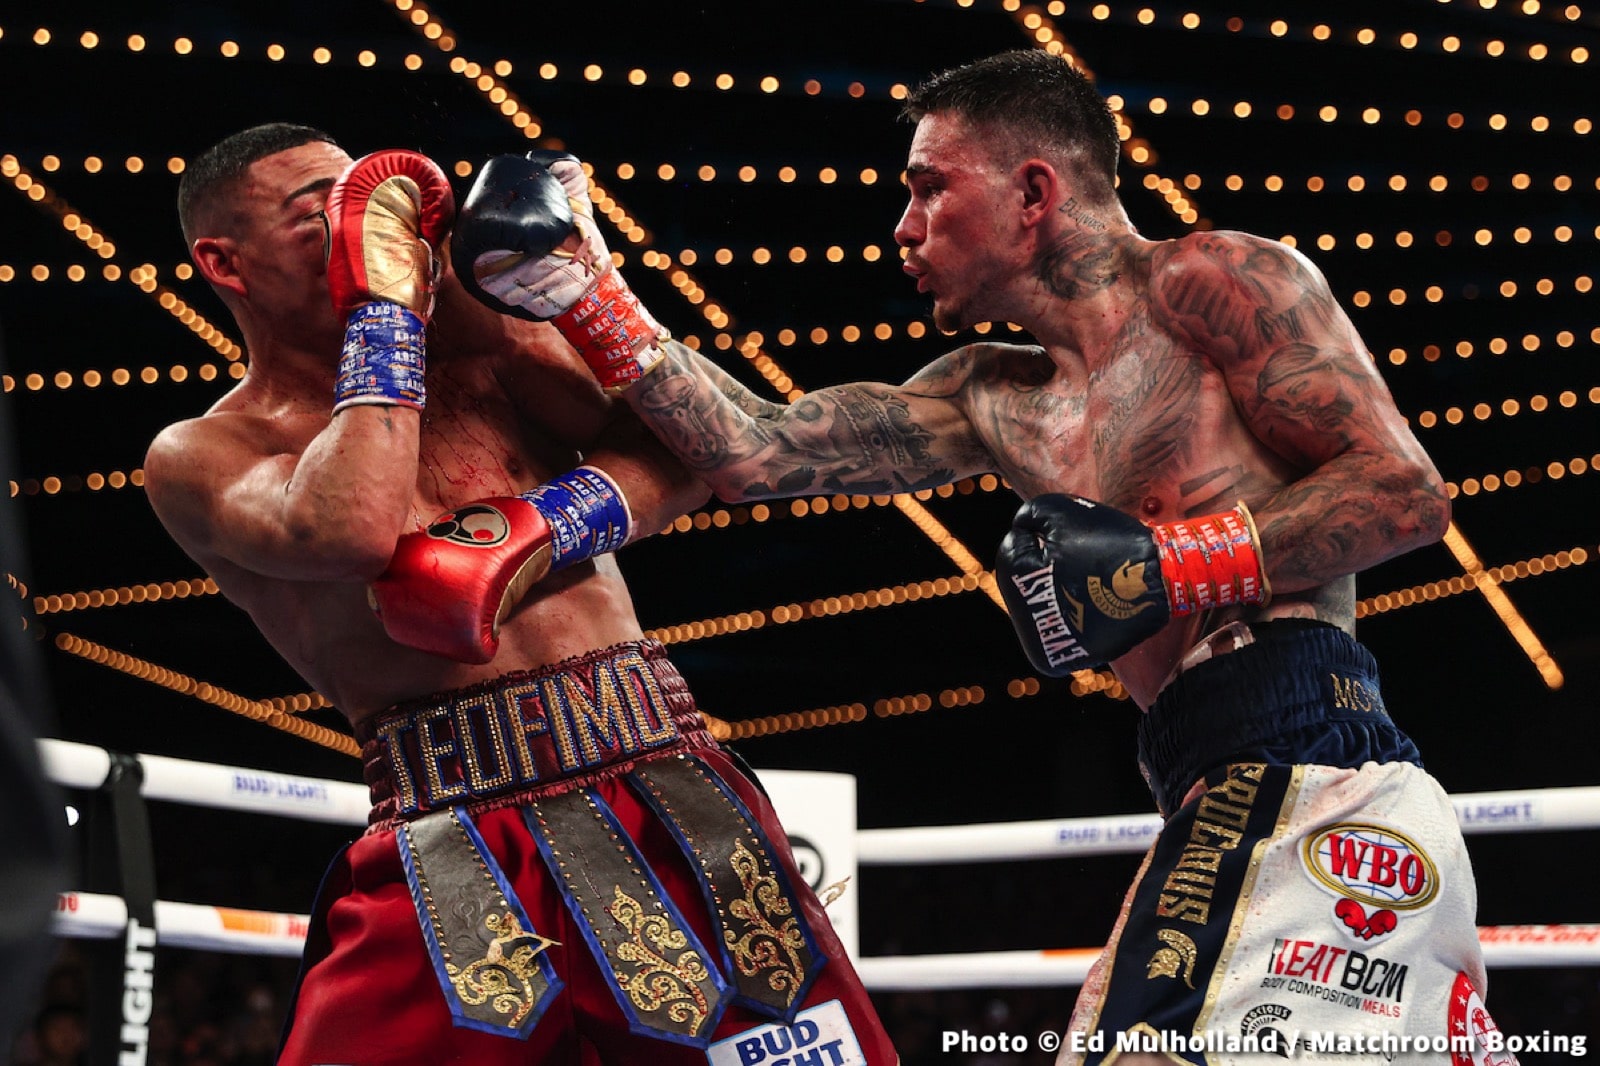 Image: Boxing Results: Teofimo “The Takeover” Lopez Upset by George “Ferocious” Kambosos, Jr. in NY!